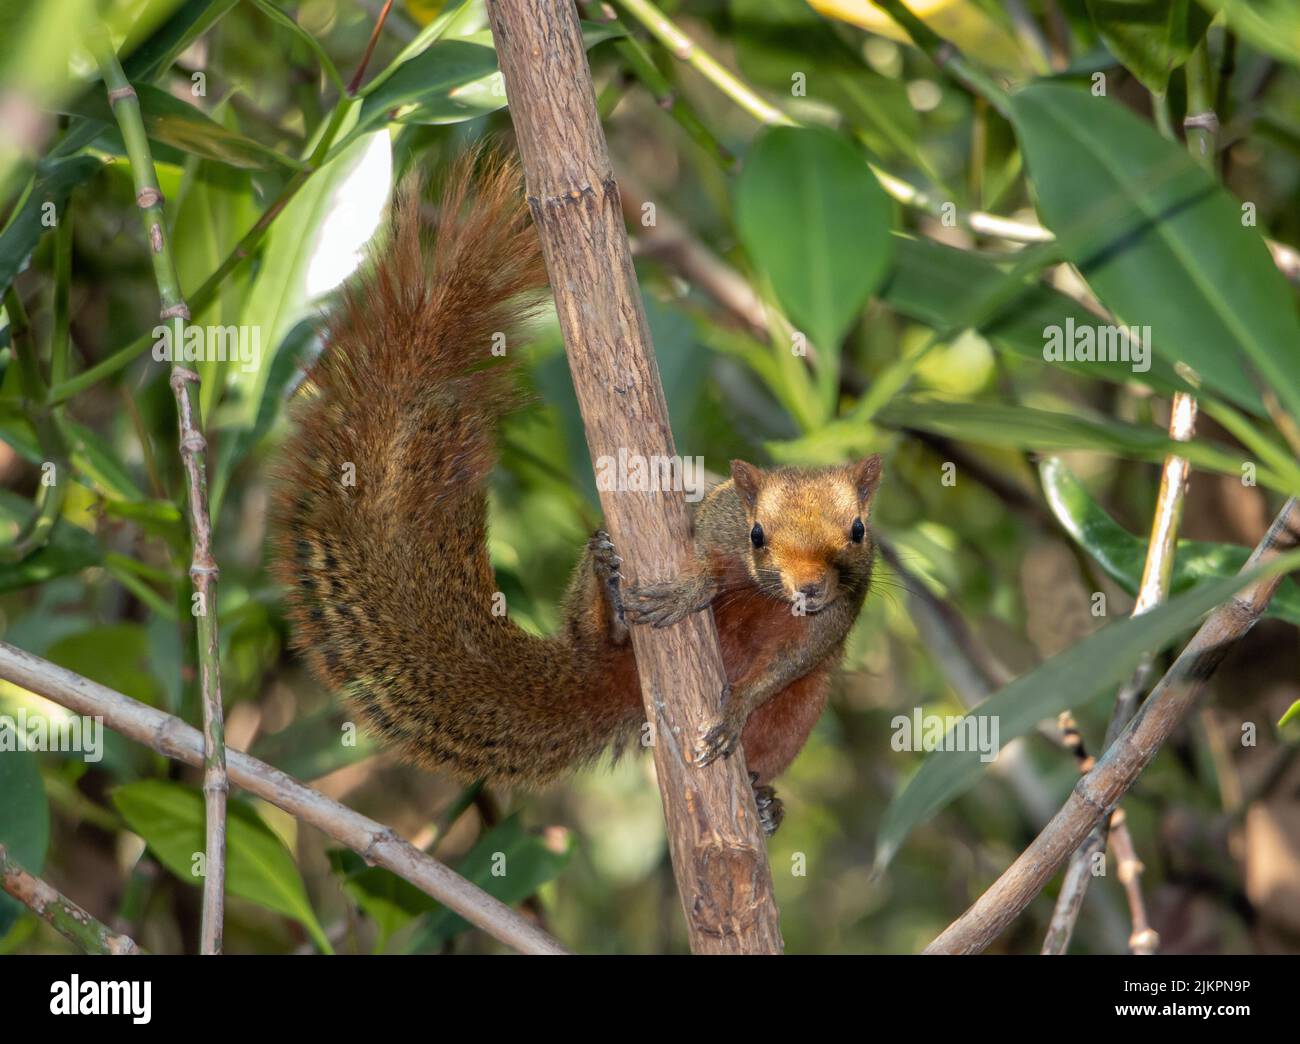 The red-bellied tree squirrel climbs on tree and look into camera. Pallas's squirrel (Callosciurus erythraeus) in a tropical nature, Thailand. Stock Photo